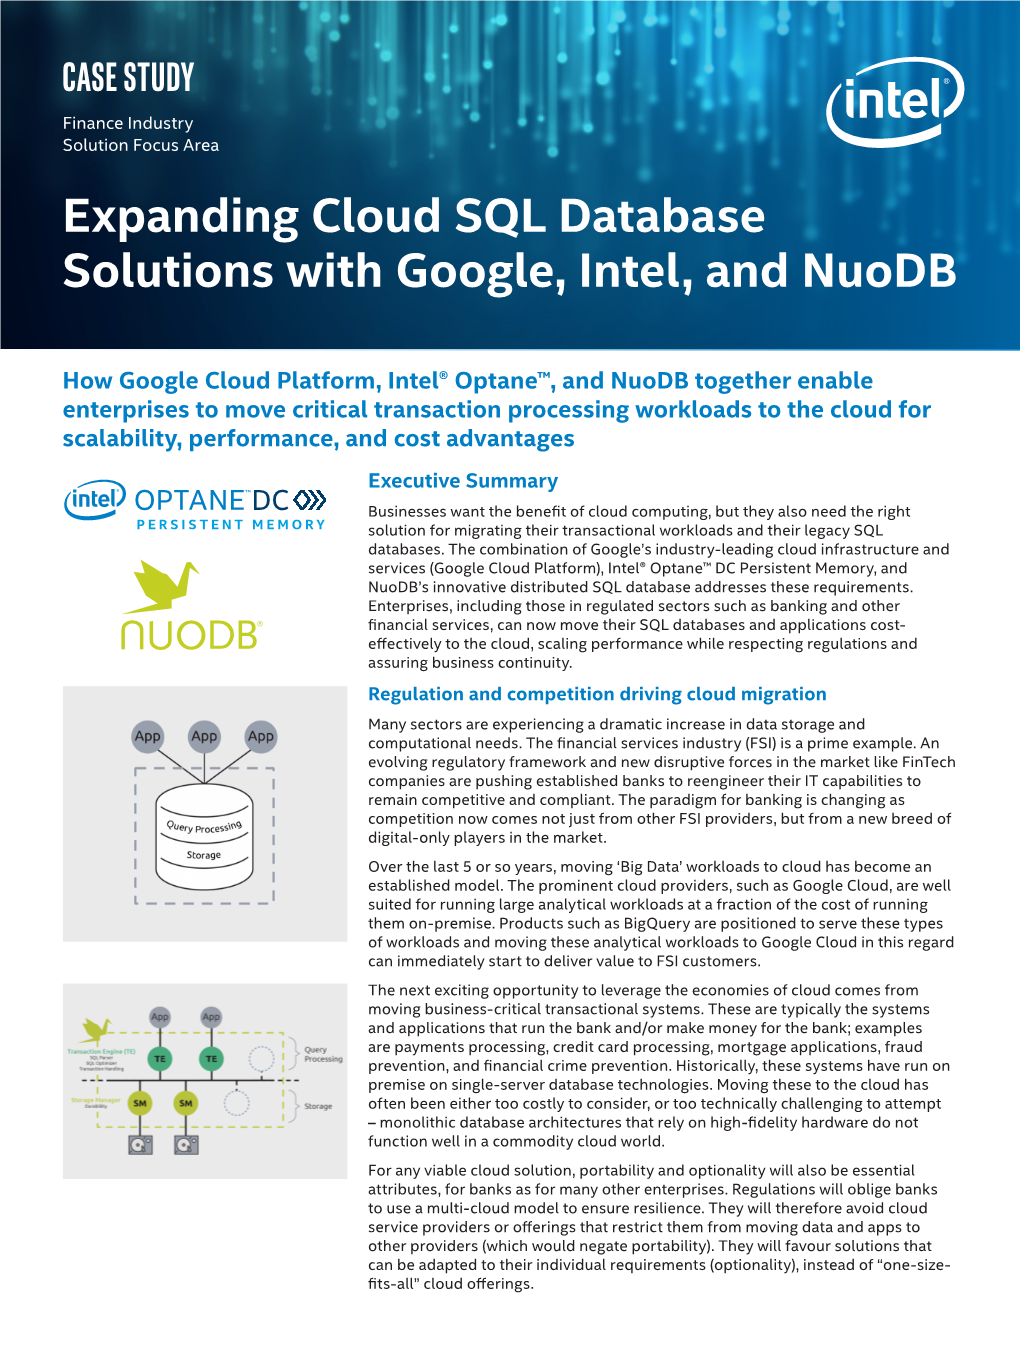 Expanding Cloud SQL Database Solutions with Google, Intel, and Nuodb